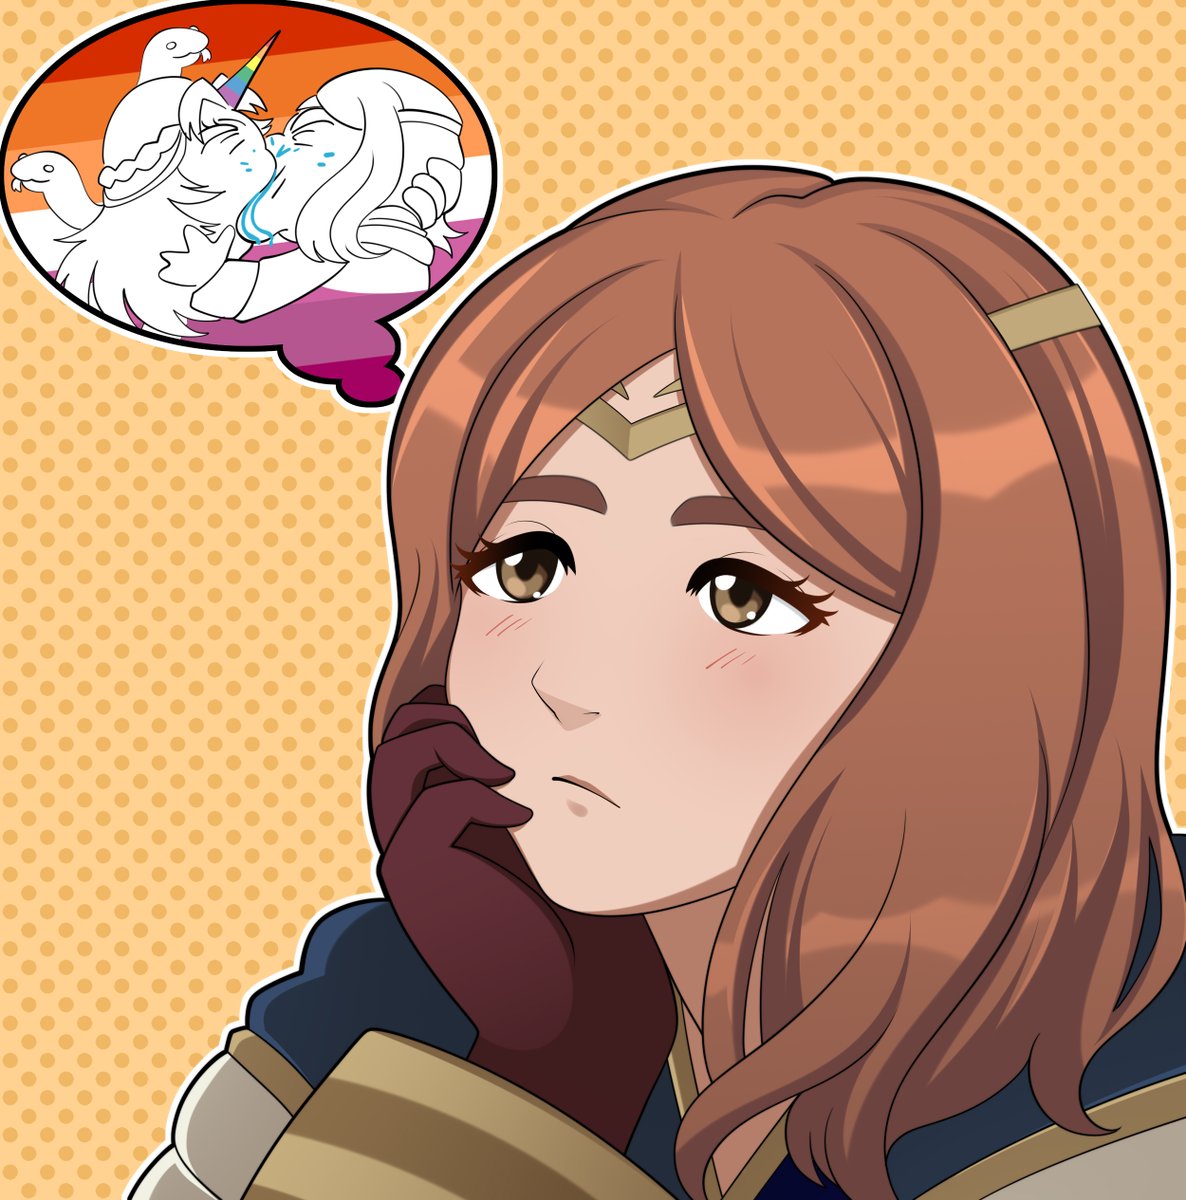 「can't think straight #FEHeroes 」|Phoebeのイラスト